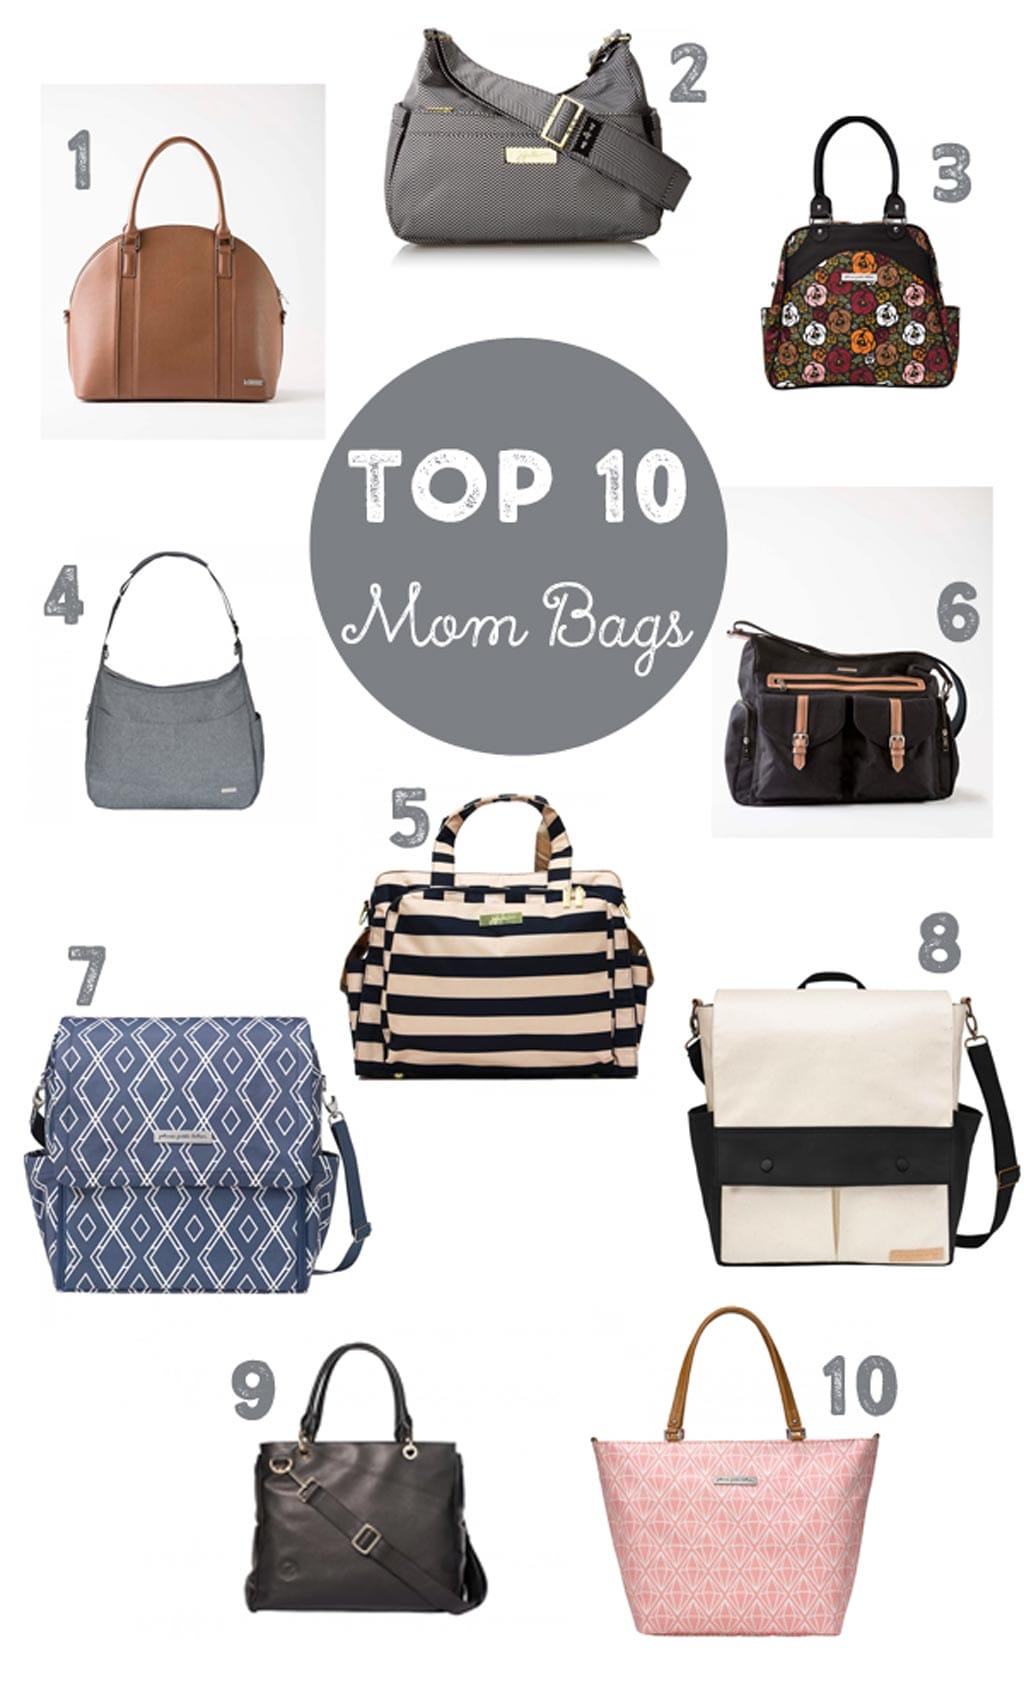 Diaper Bag 101 - What to Pack in a Diaper Bag | Ergobaby